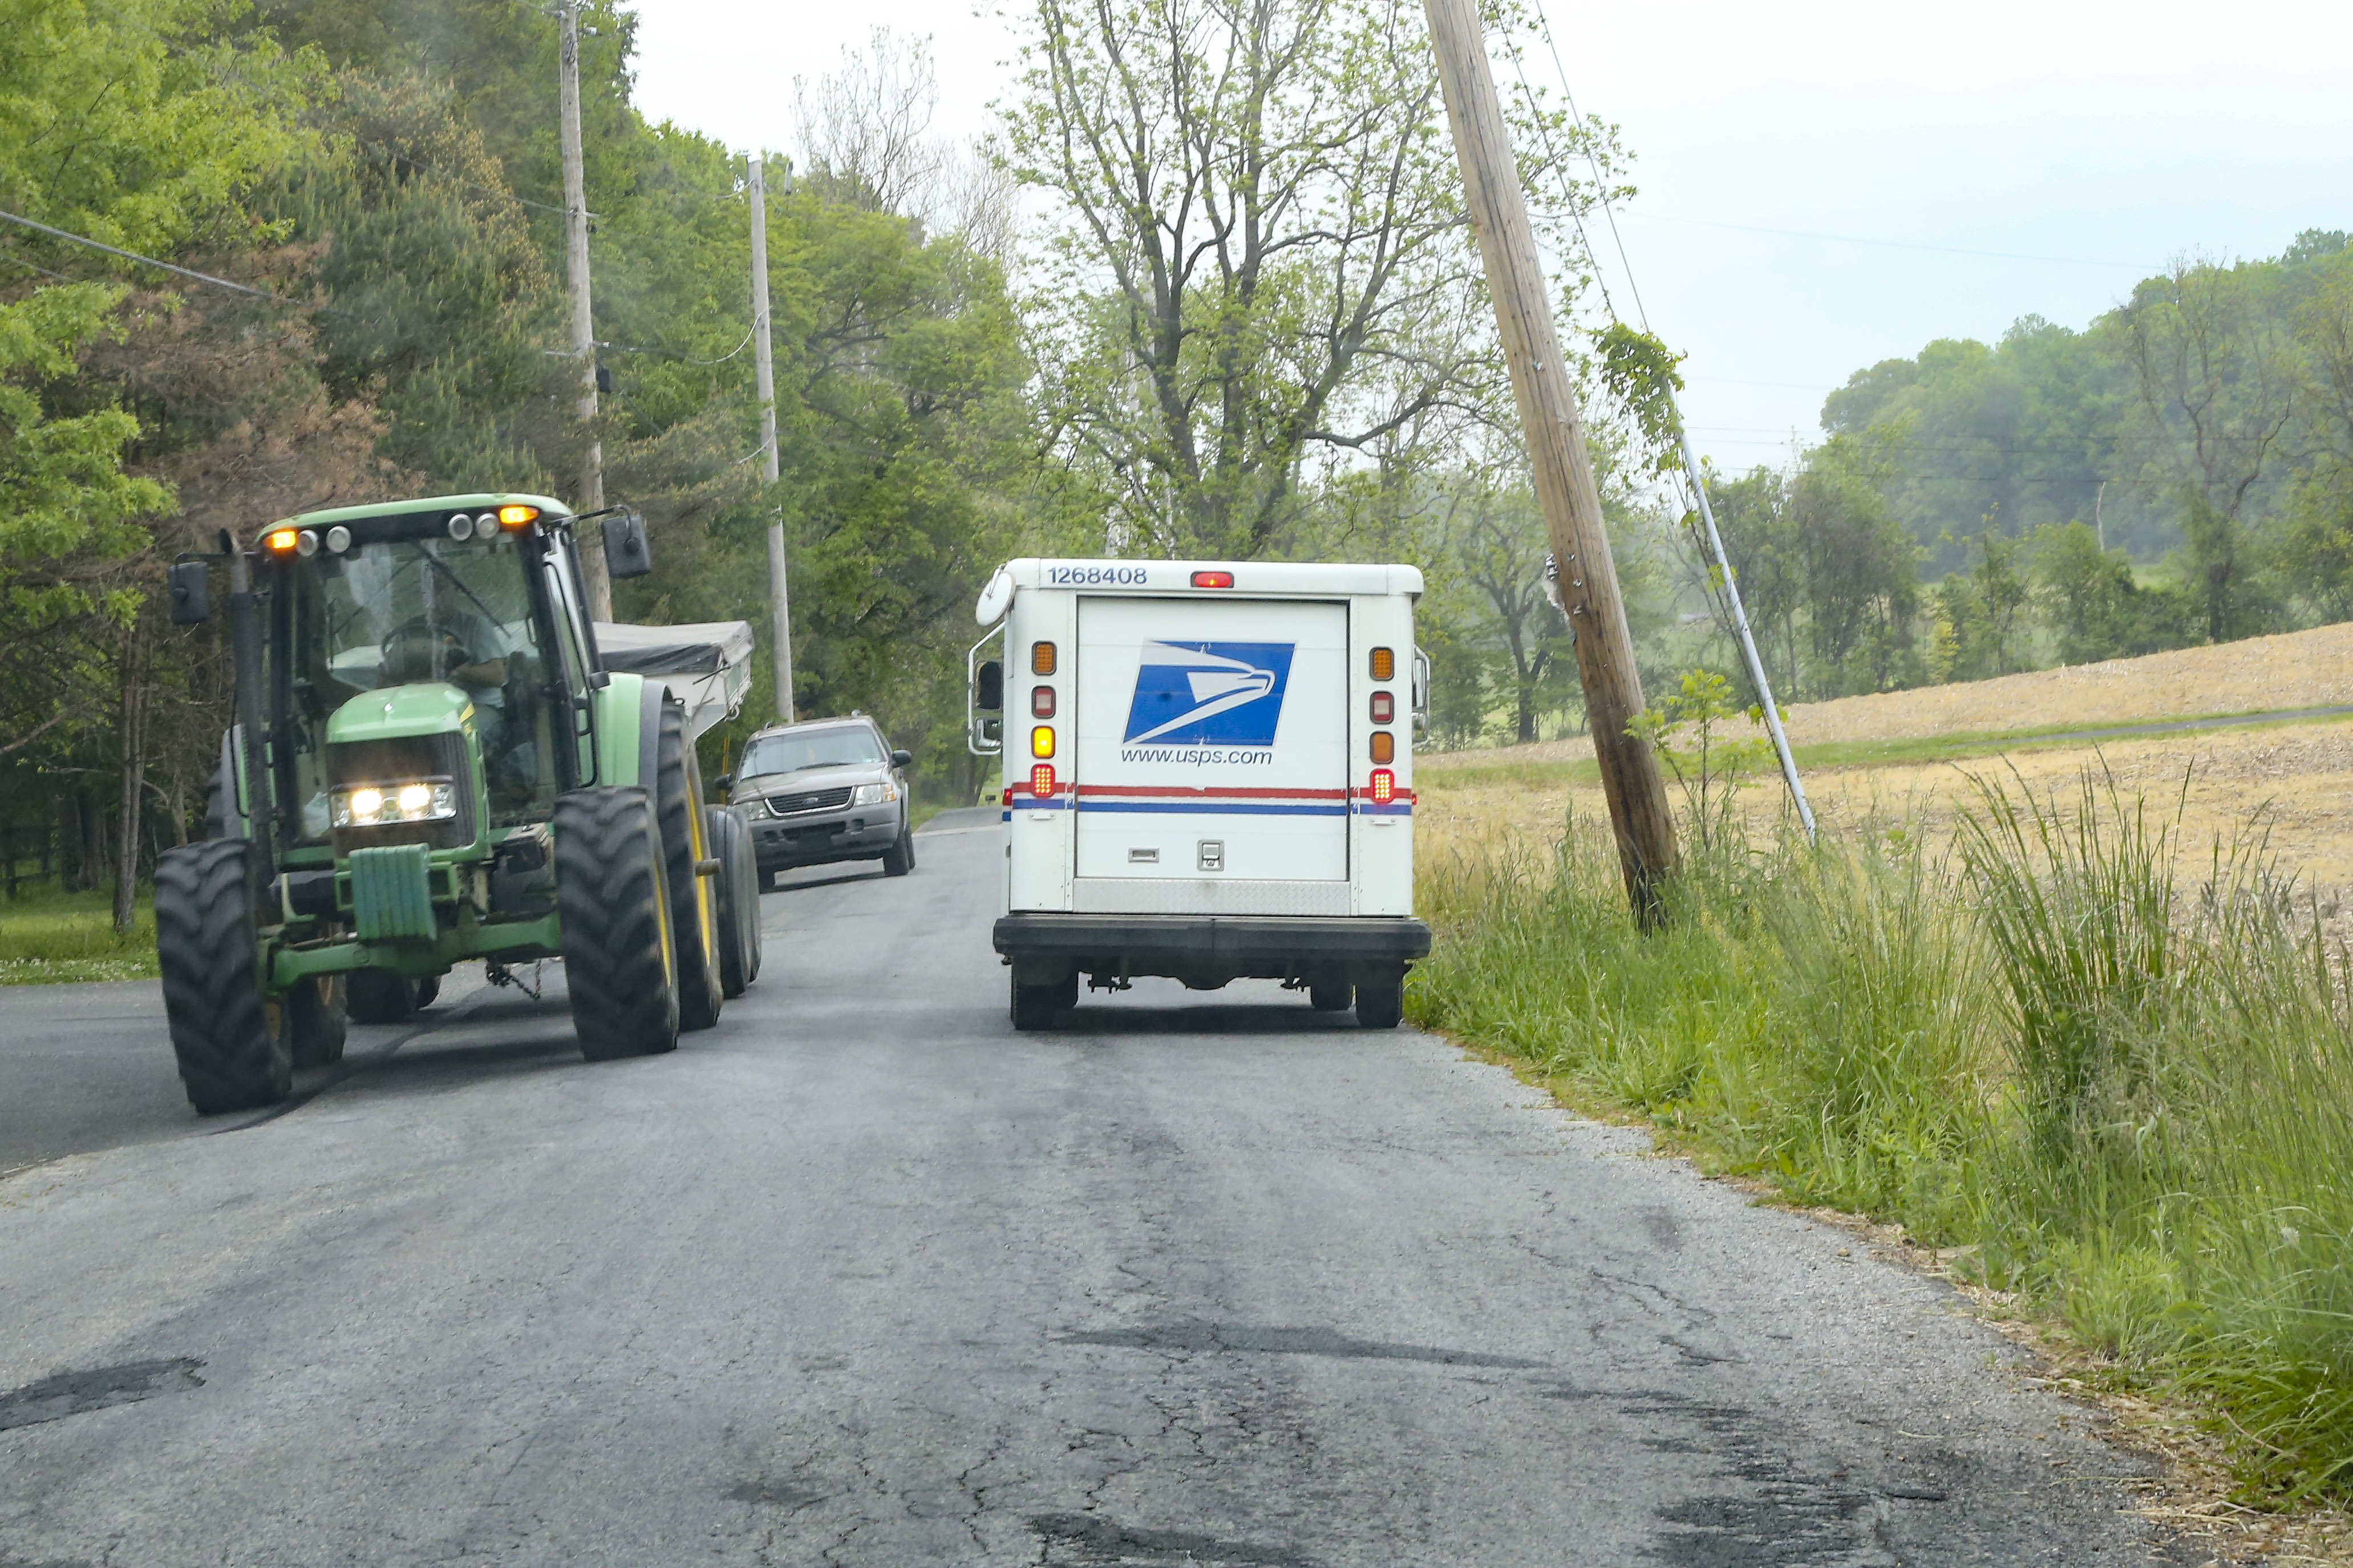 USPS wants to be the backbone of the e-commerce economy. That